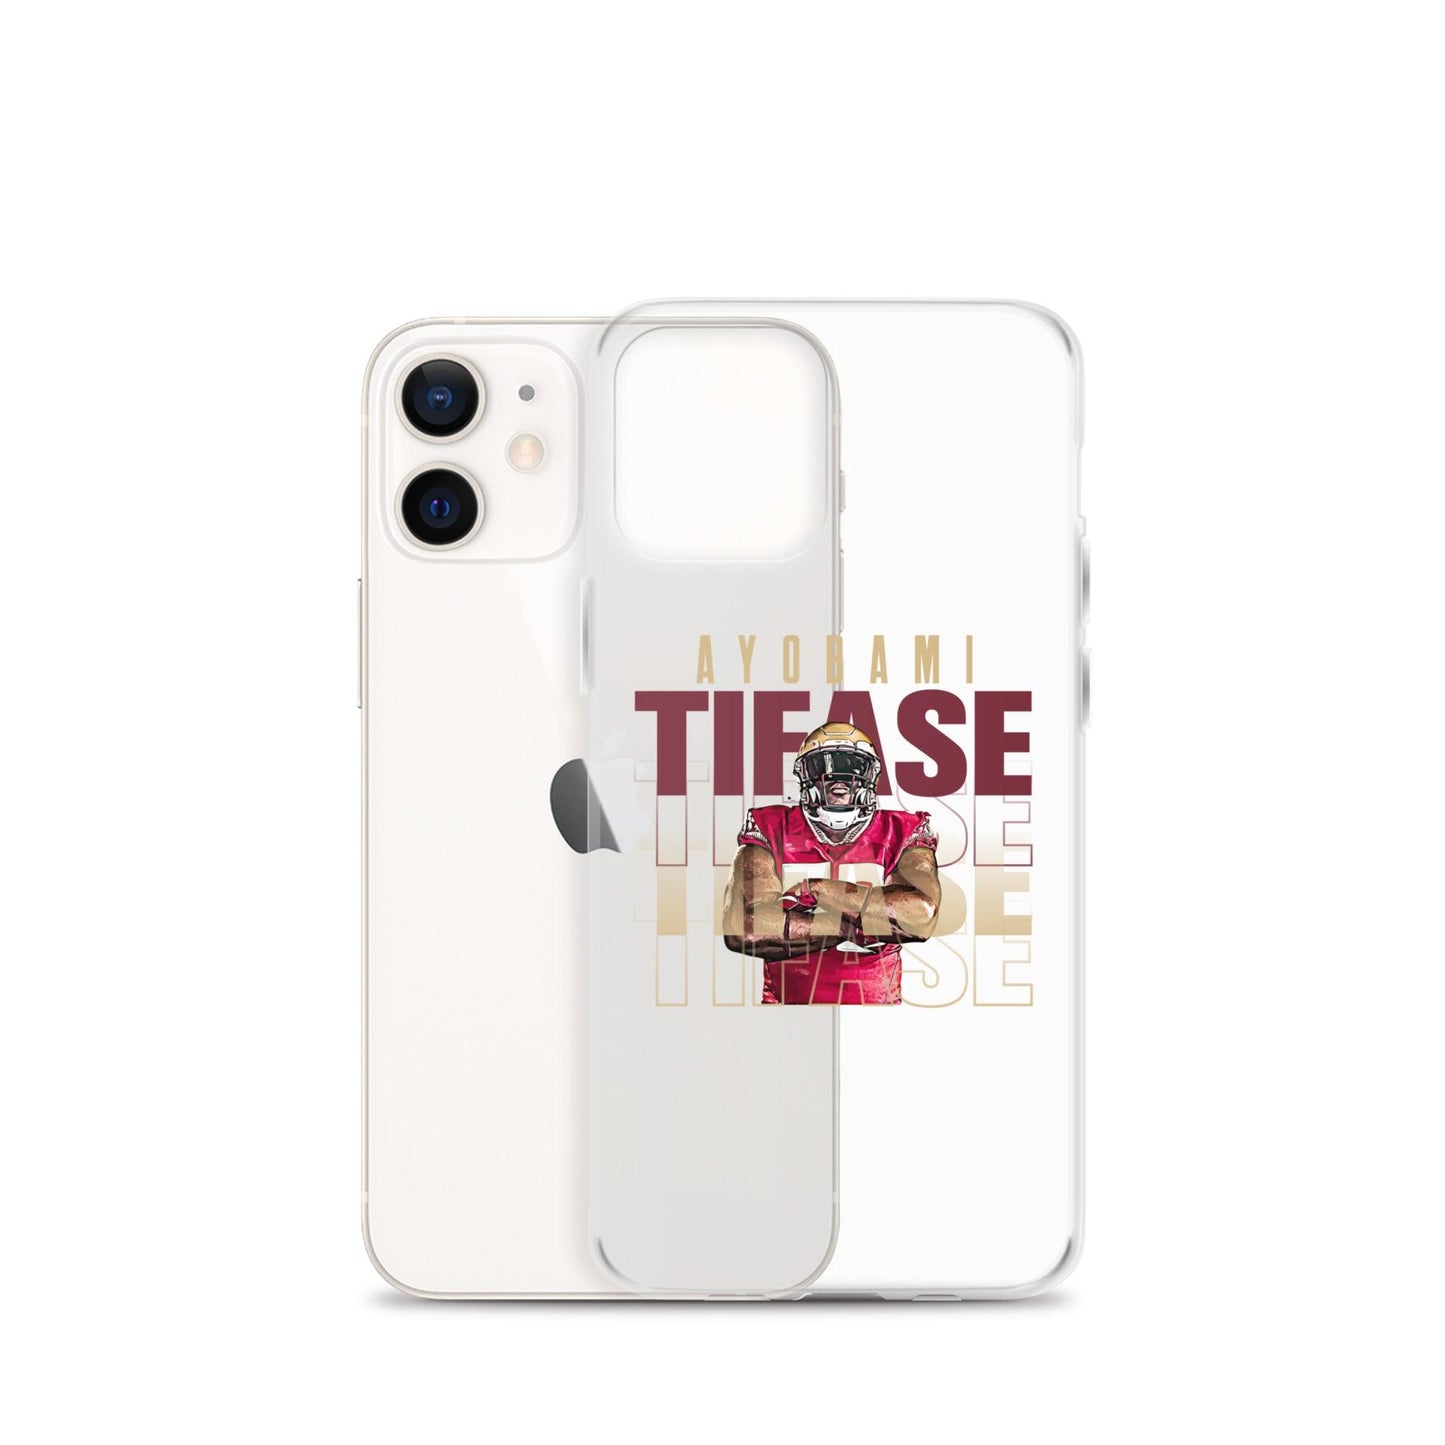 Ayobami Tifase "Repeat" iPhone Case - Fan Arch